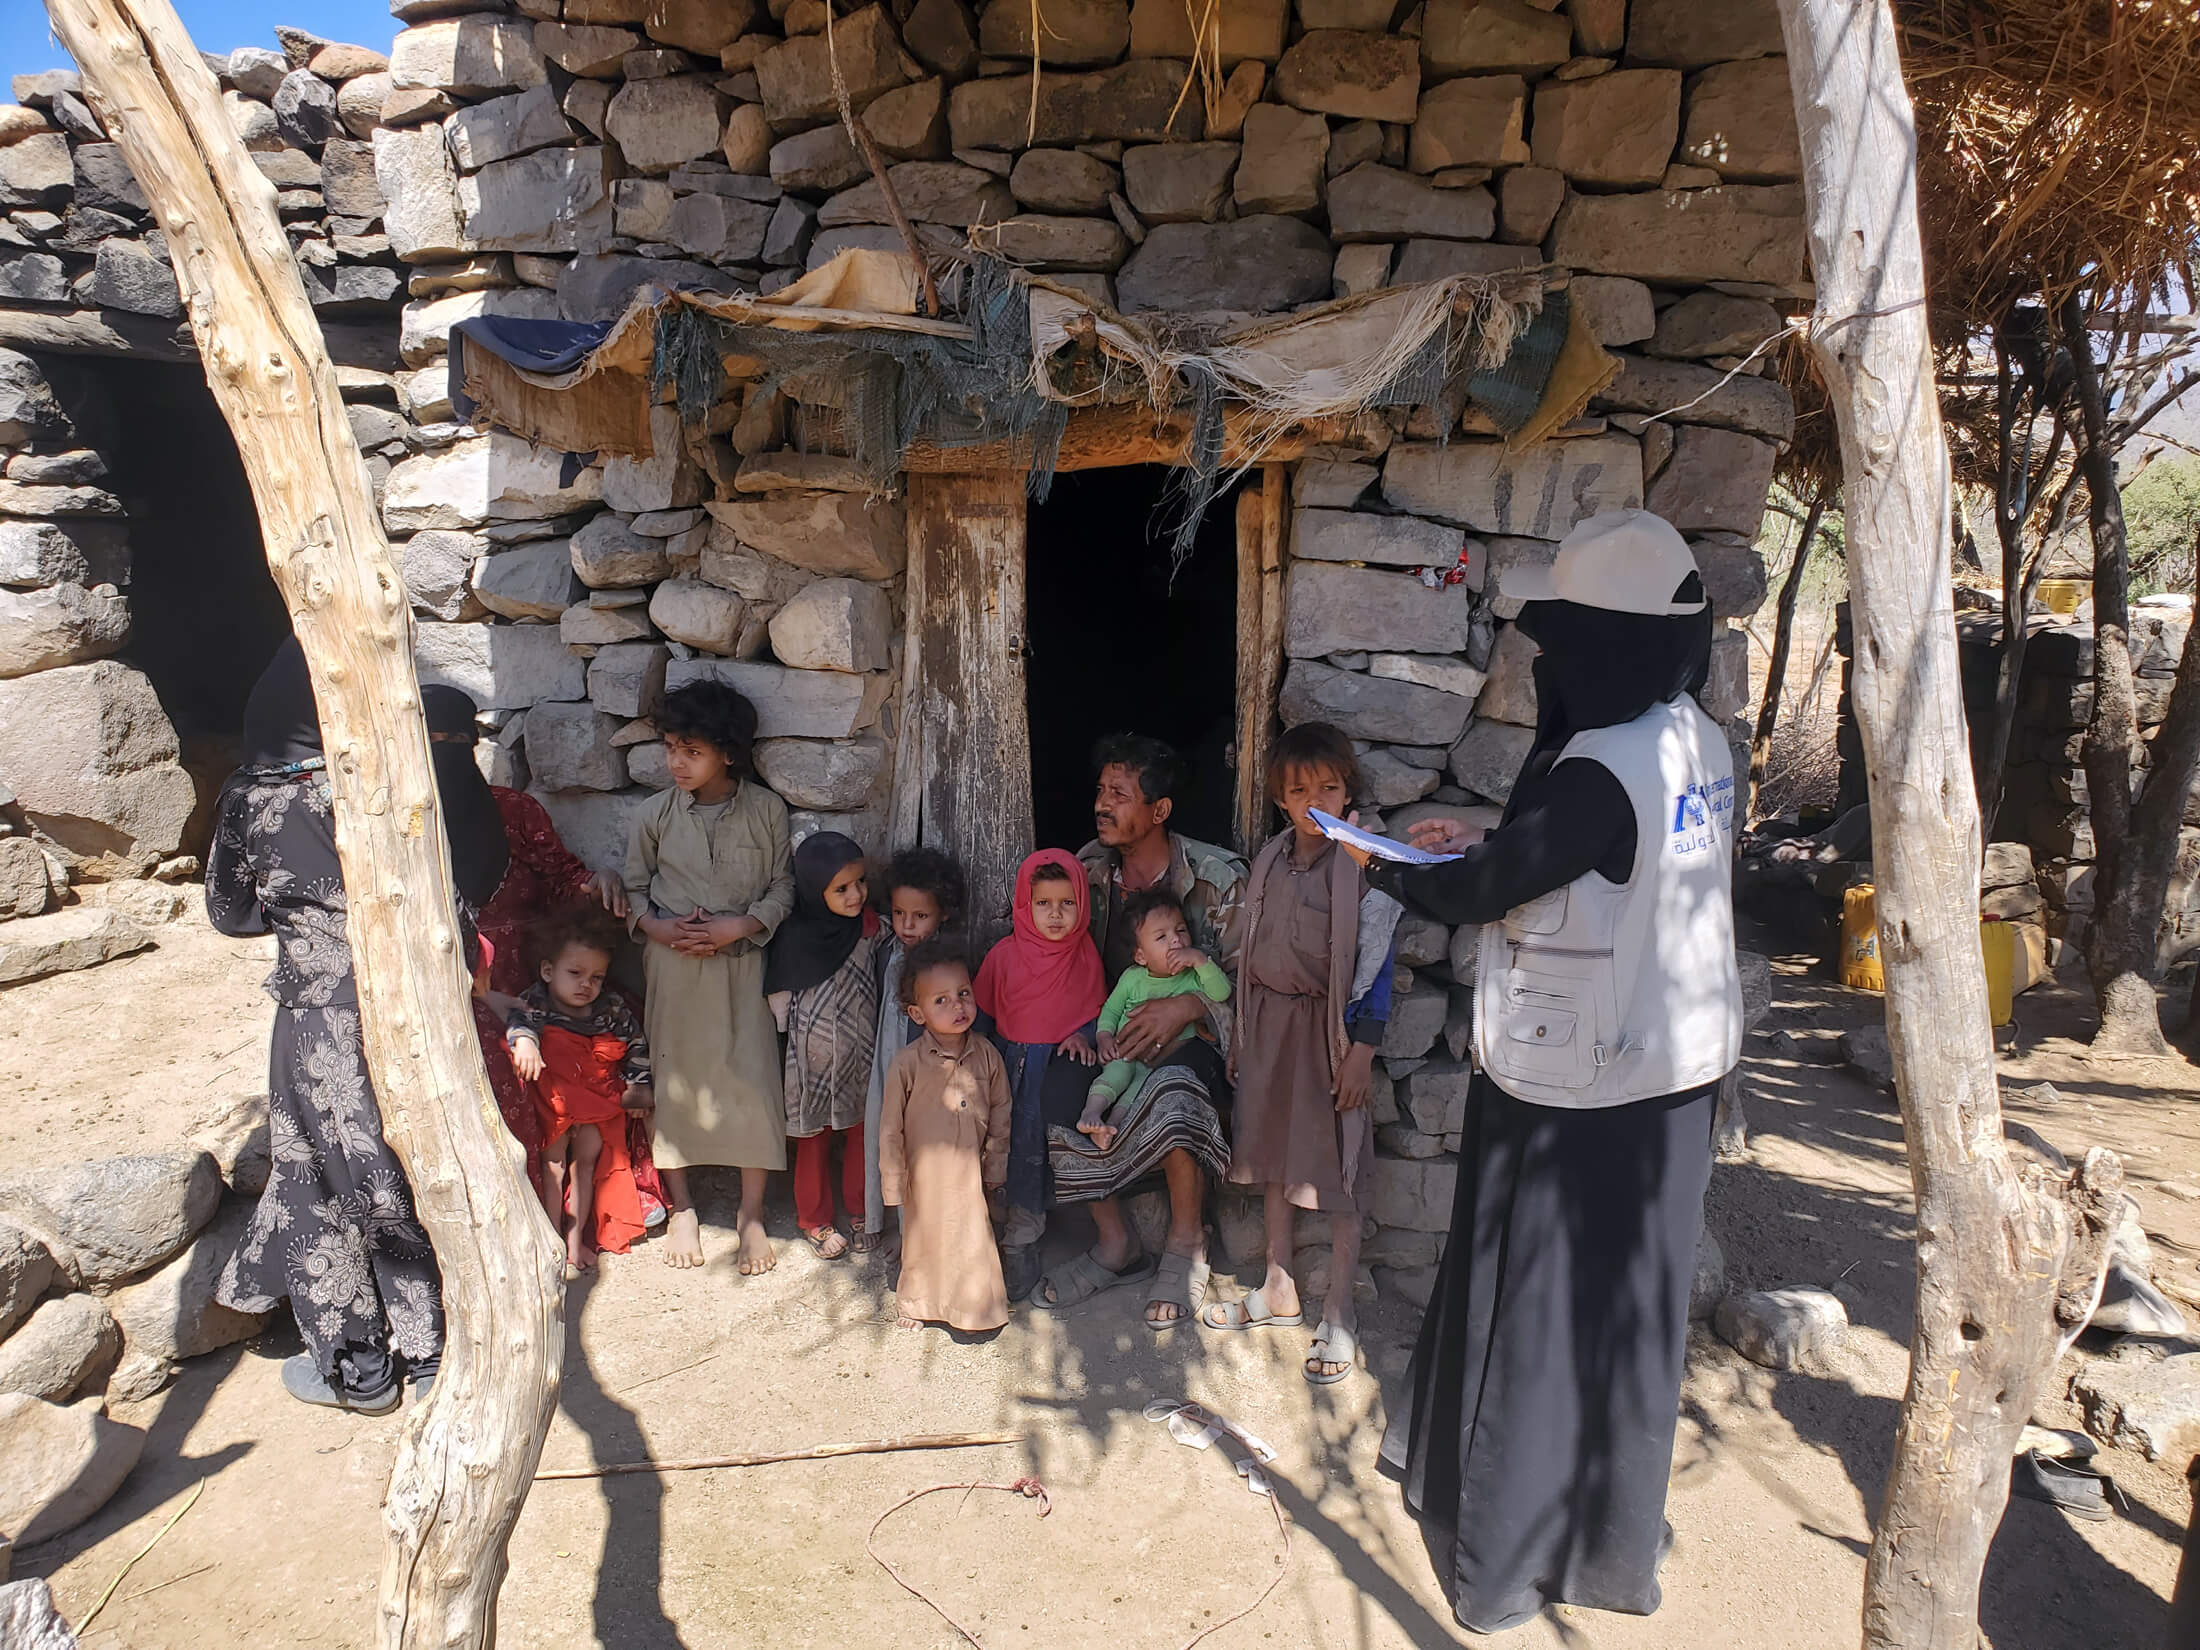 An International Medical Corps community health worker speaks to Nawaya’s family outside their home in Al Qafr.